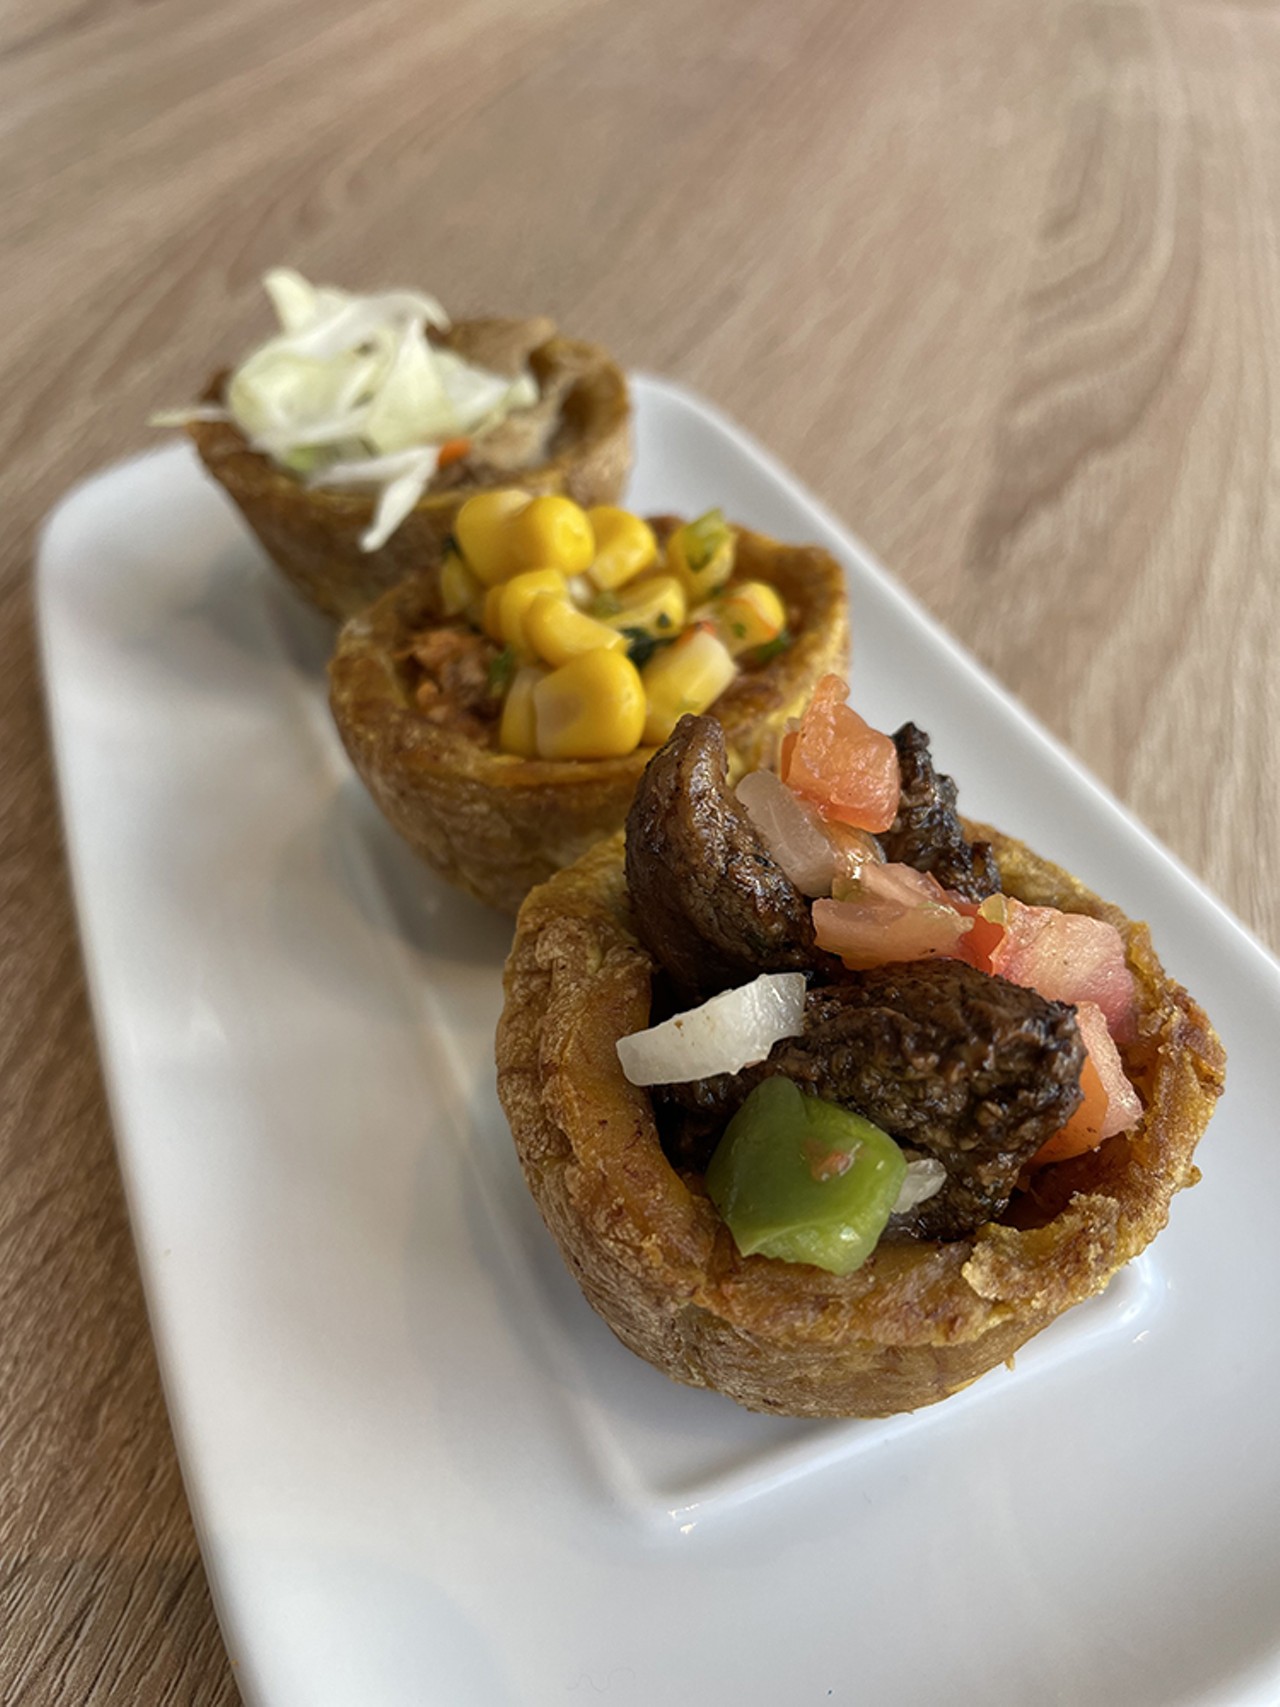 MashRoots
5903 Hamilton Ave., College Hill
Caribbean Plantain Cups: Indulge in Caribbean flavors with our Plantain Taco Cups (chicken, pork, and steak), your choice of veggies, and sauce!